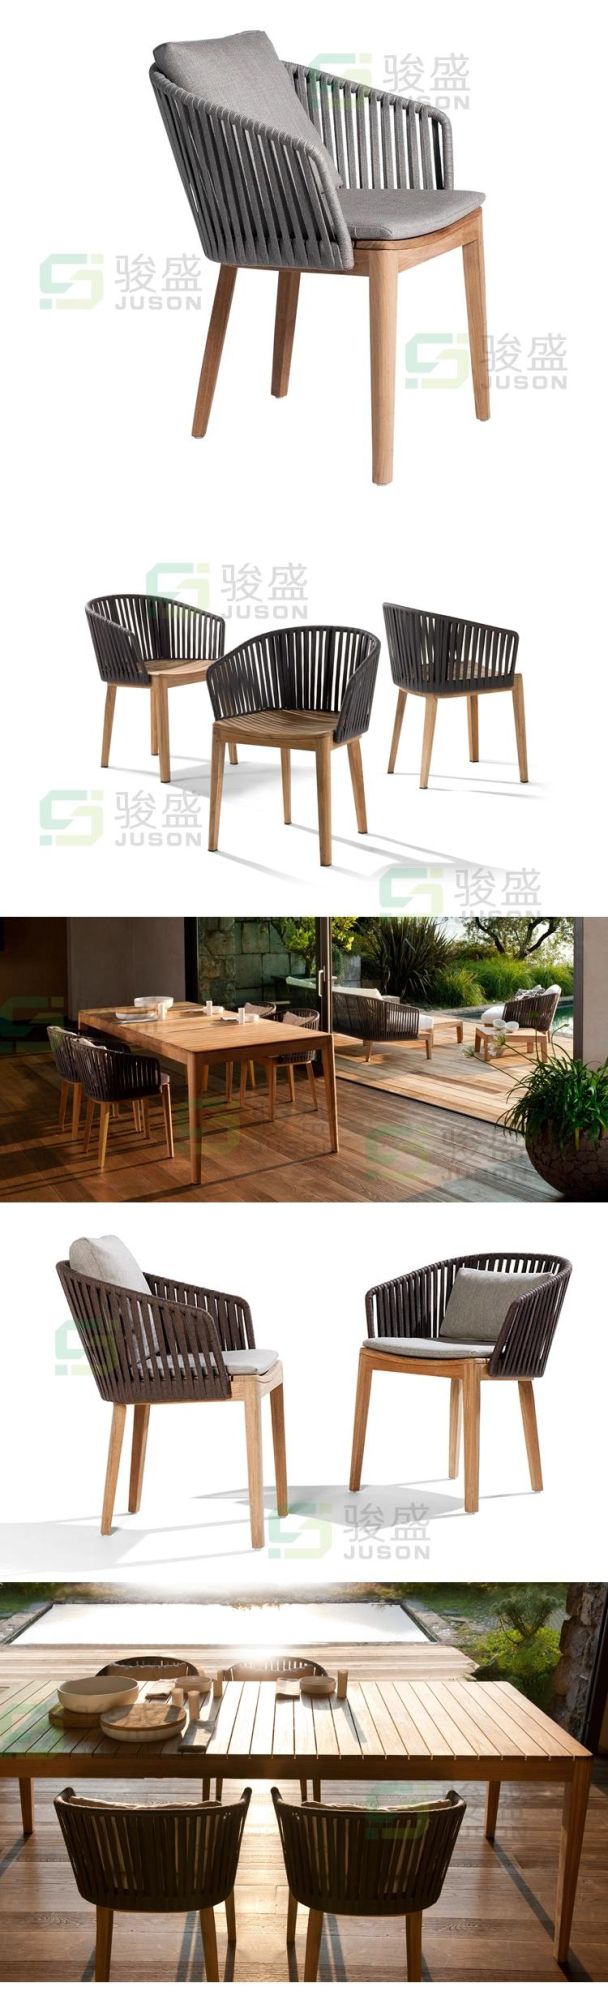 Woodeen Outdoor Furniture Garden Dining Table and Chair